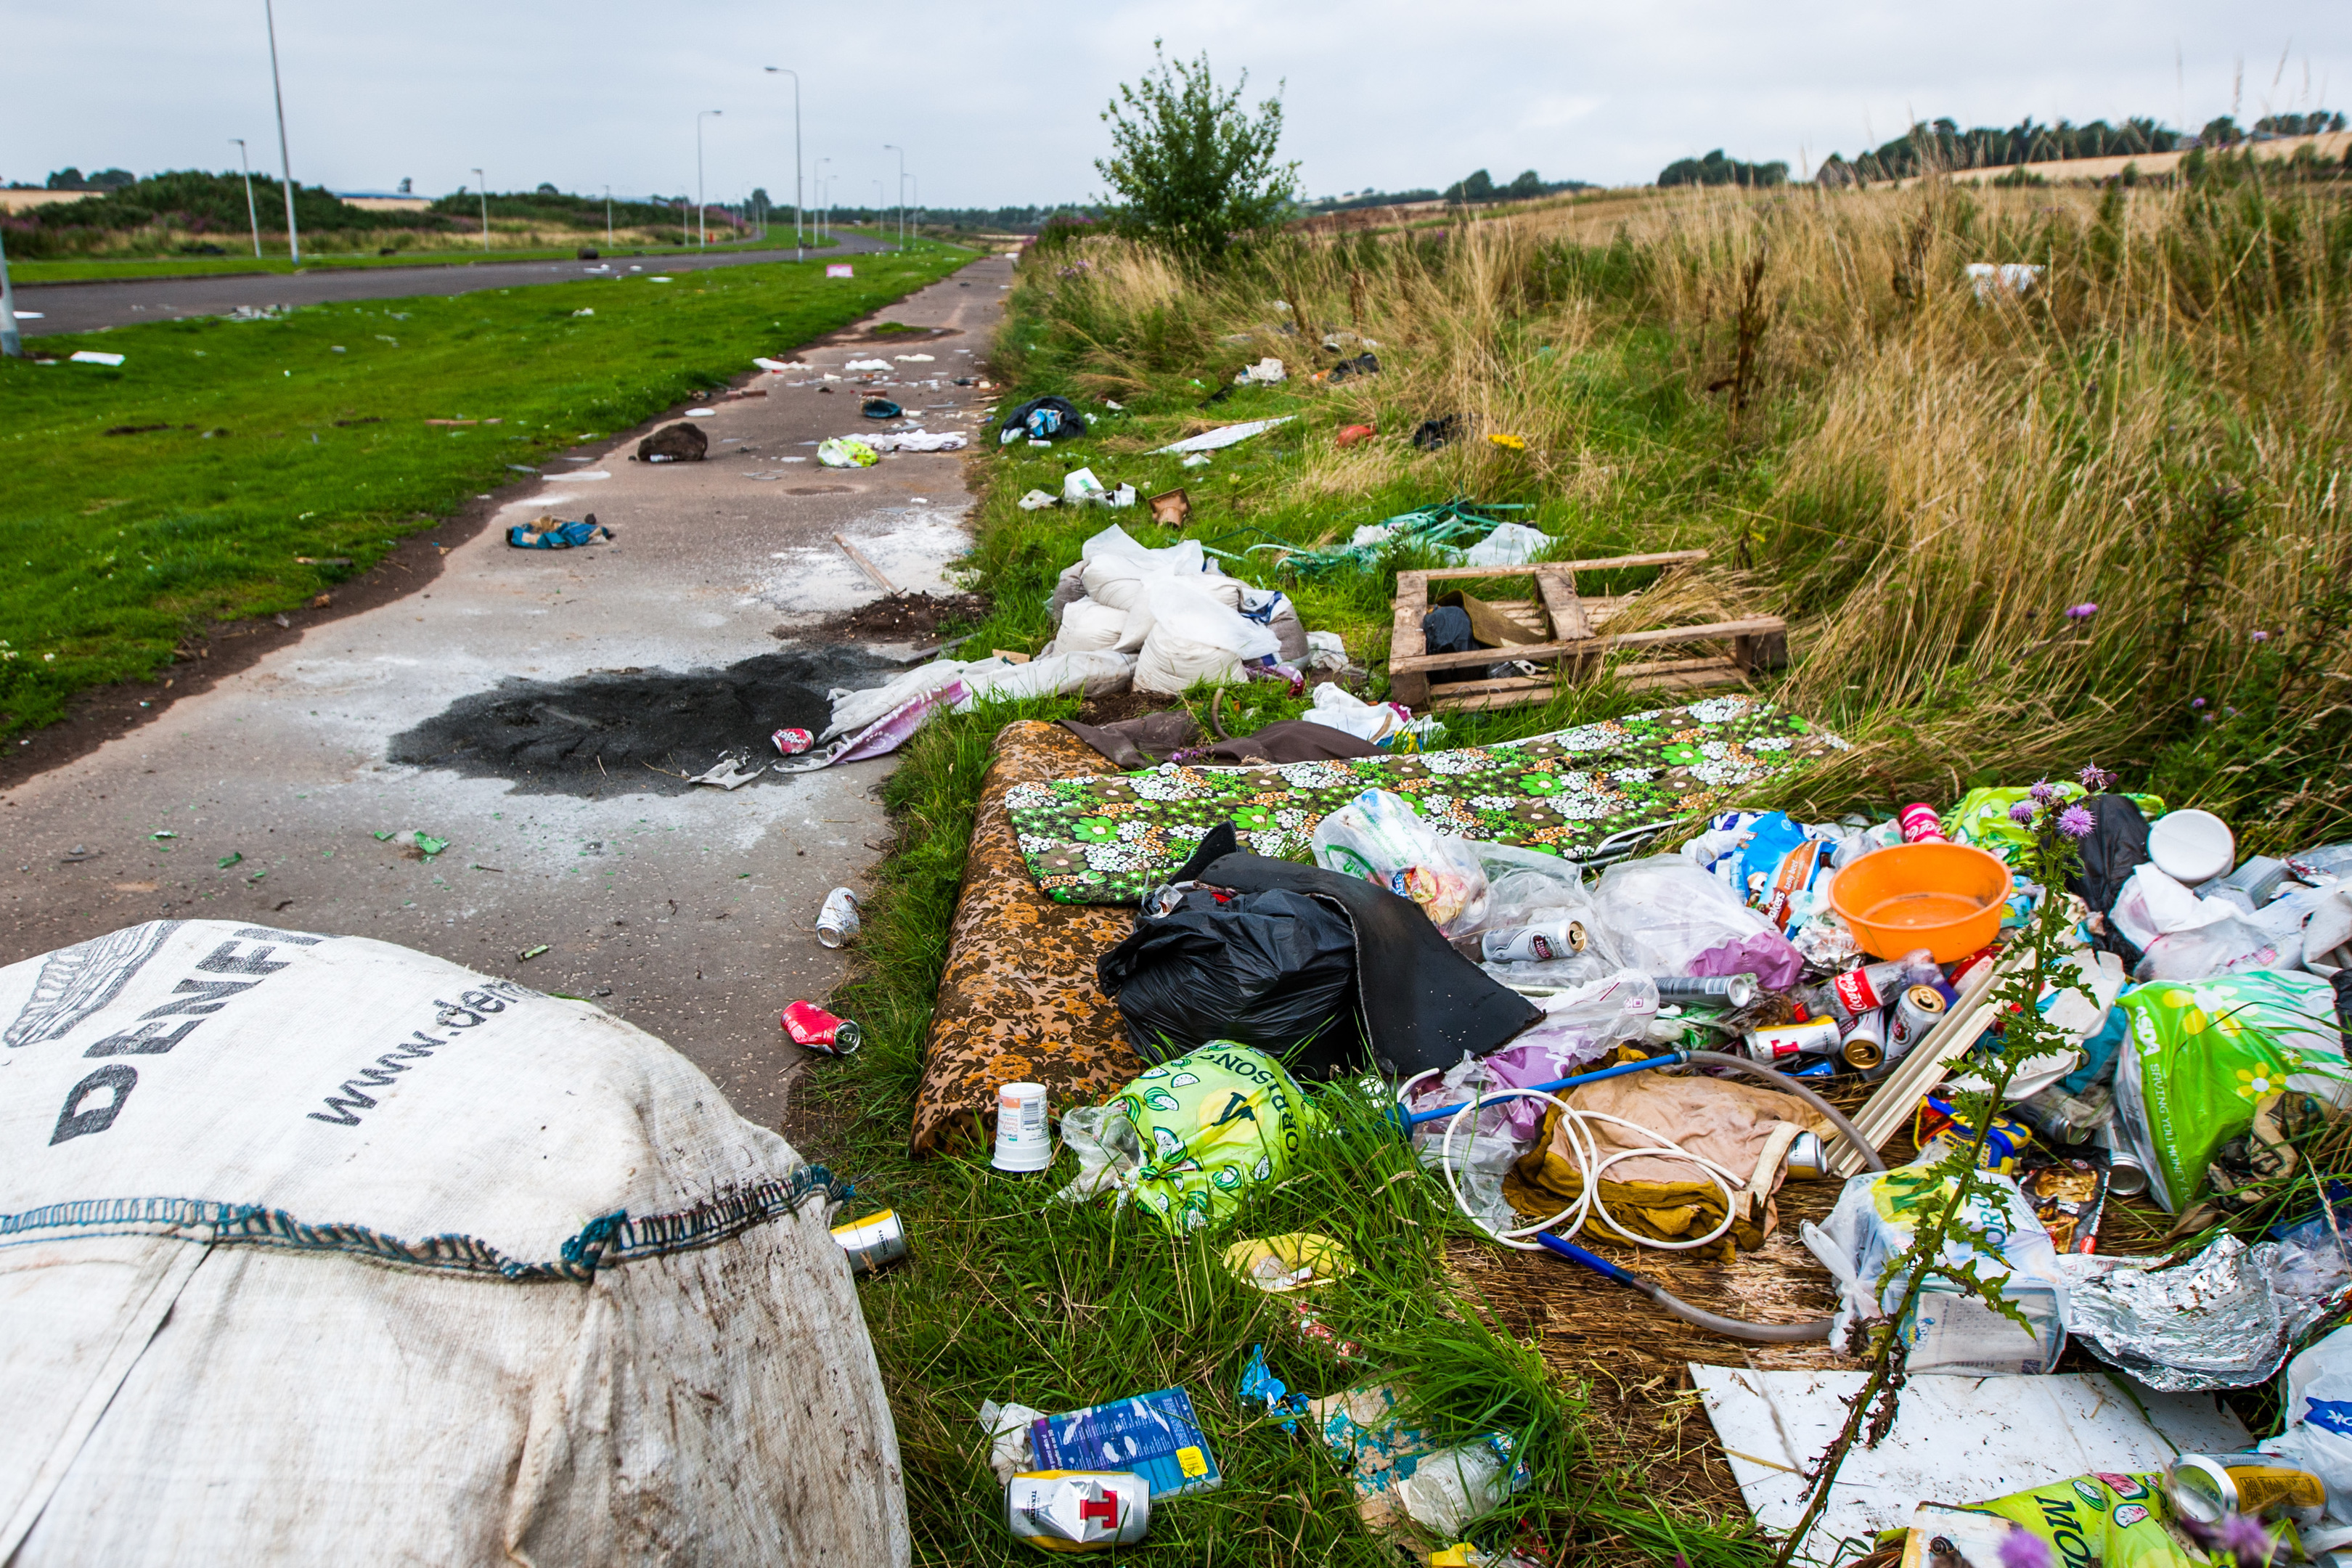 Mess and rubbish left behind after Travellers campsite moves on, Dundee (Steve MacDougall / DC Thomson)